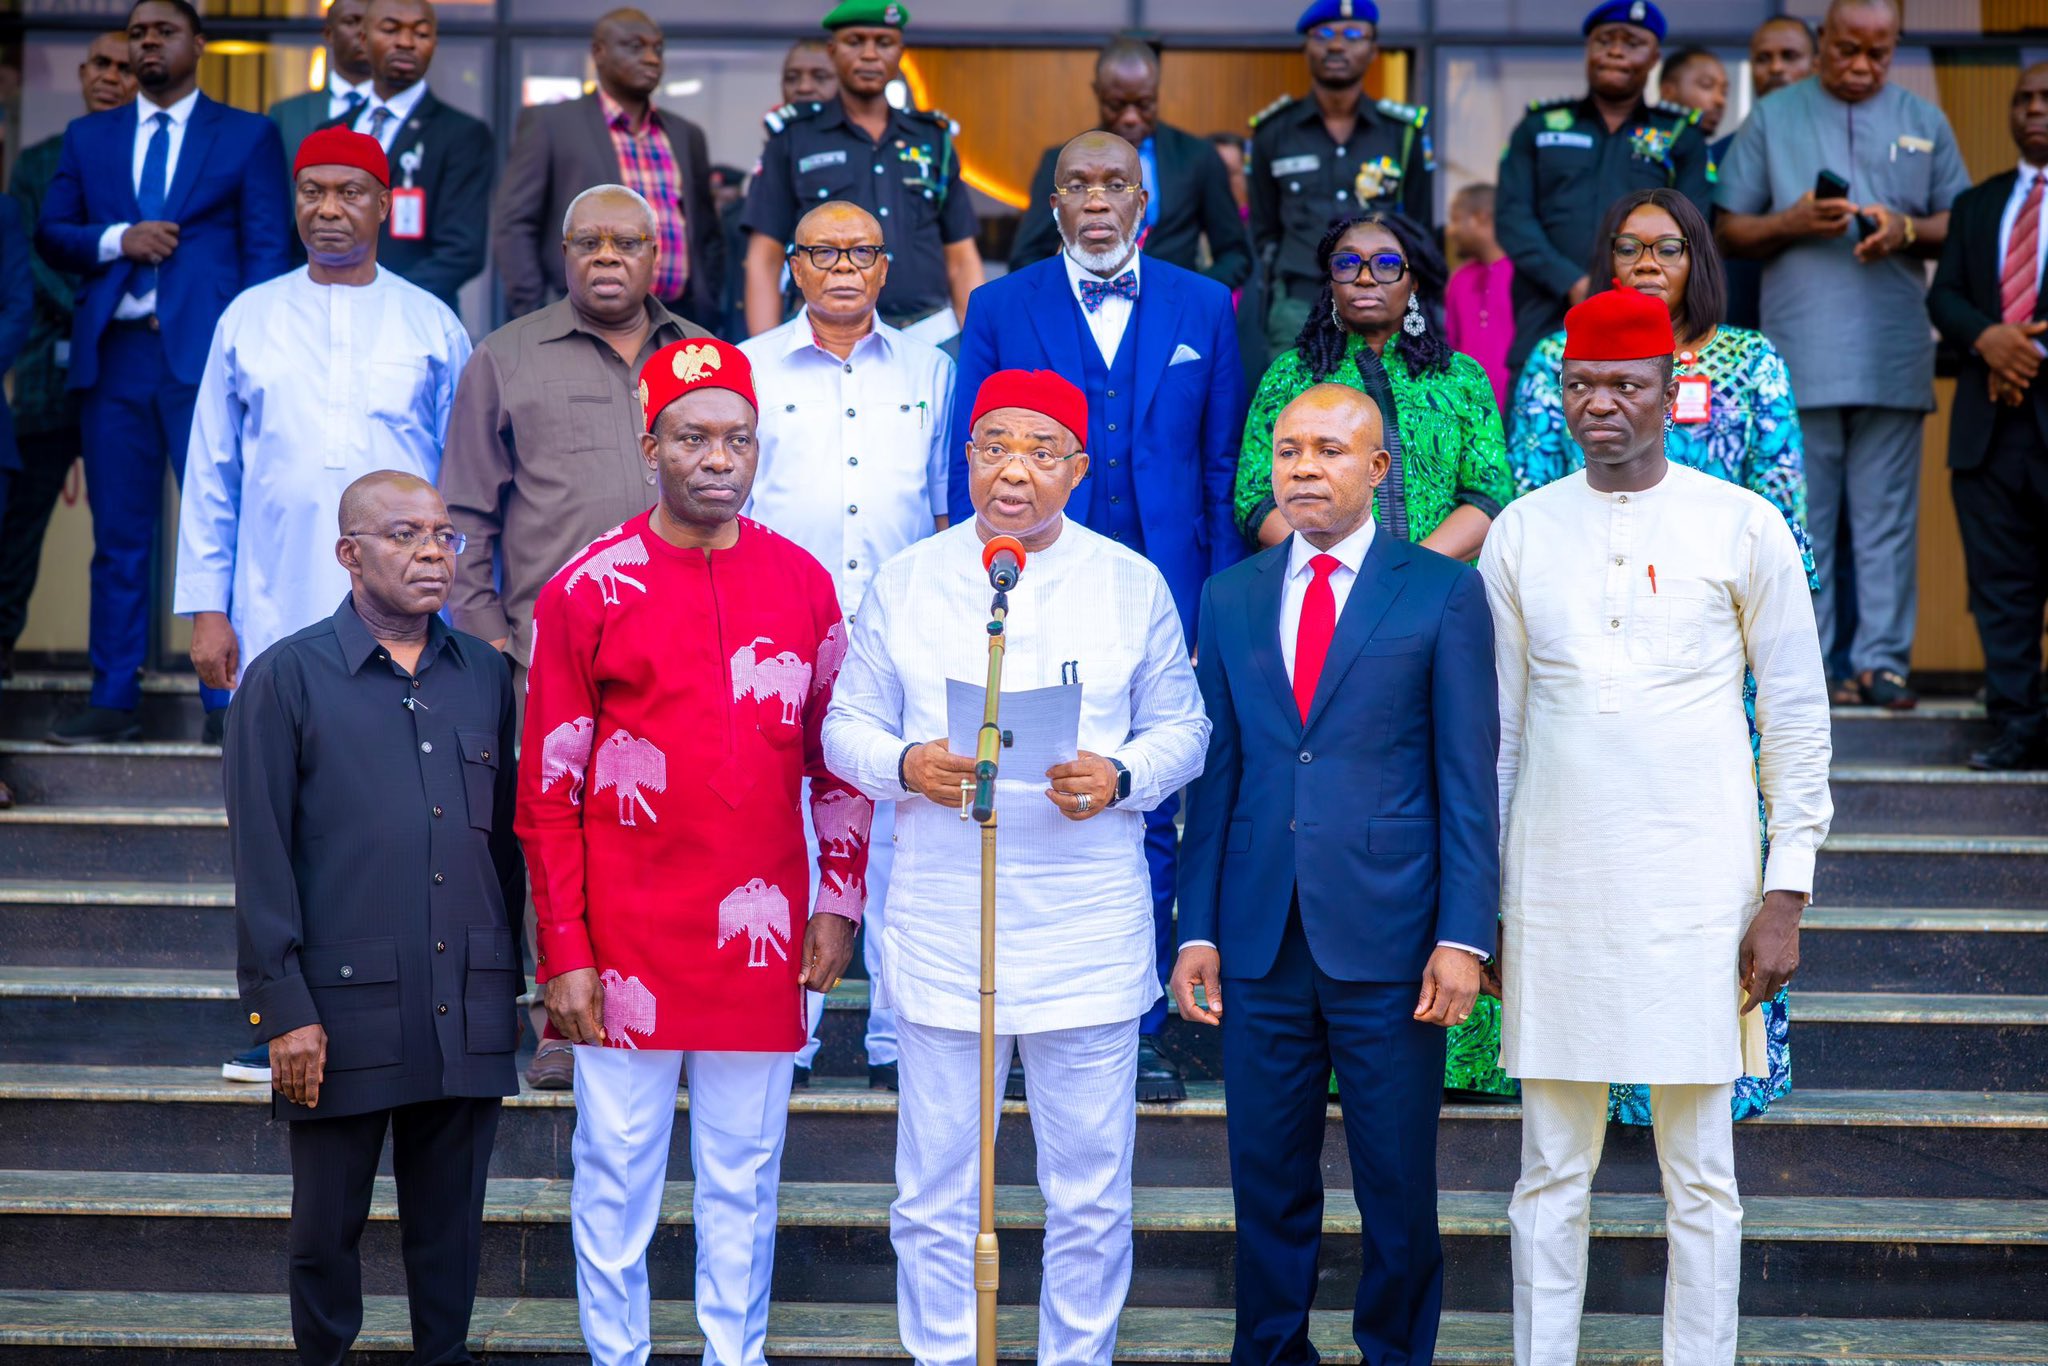 South-East Governors' Forum: Charting a Course for Regional Progress